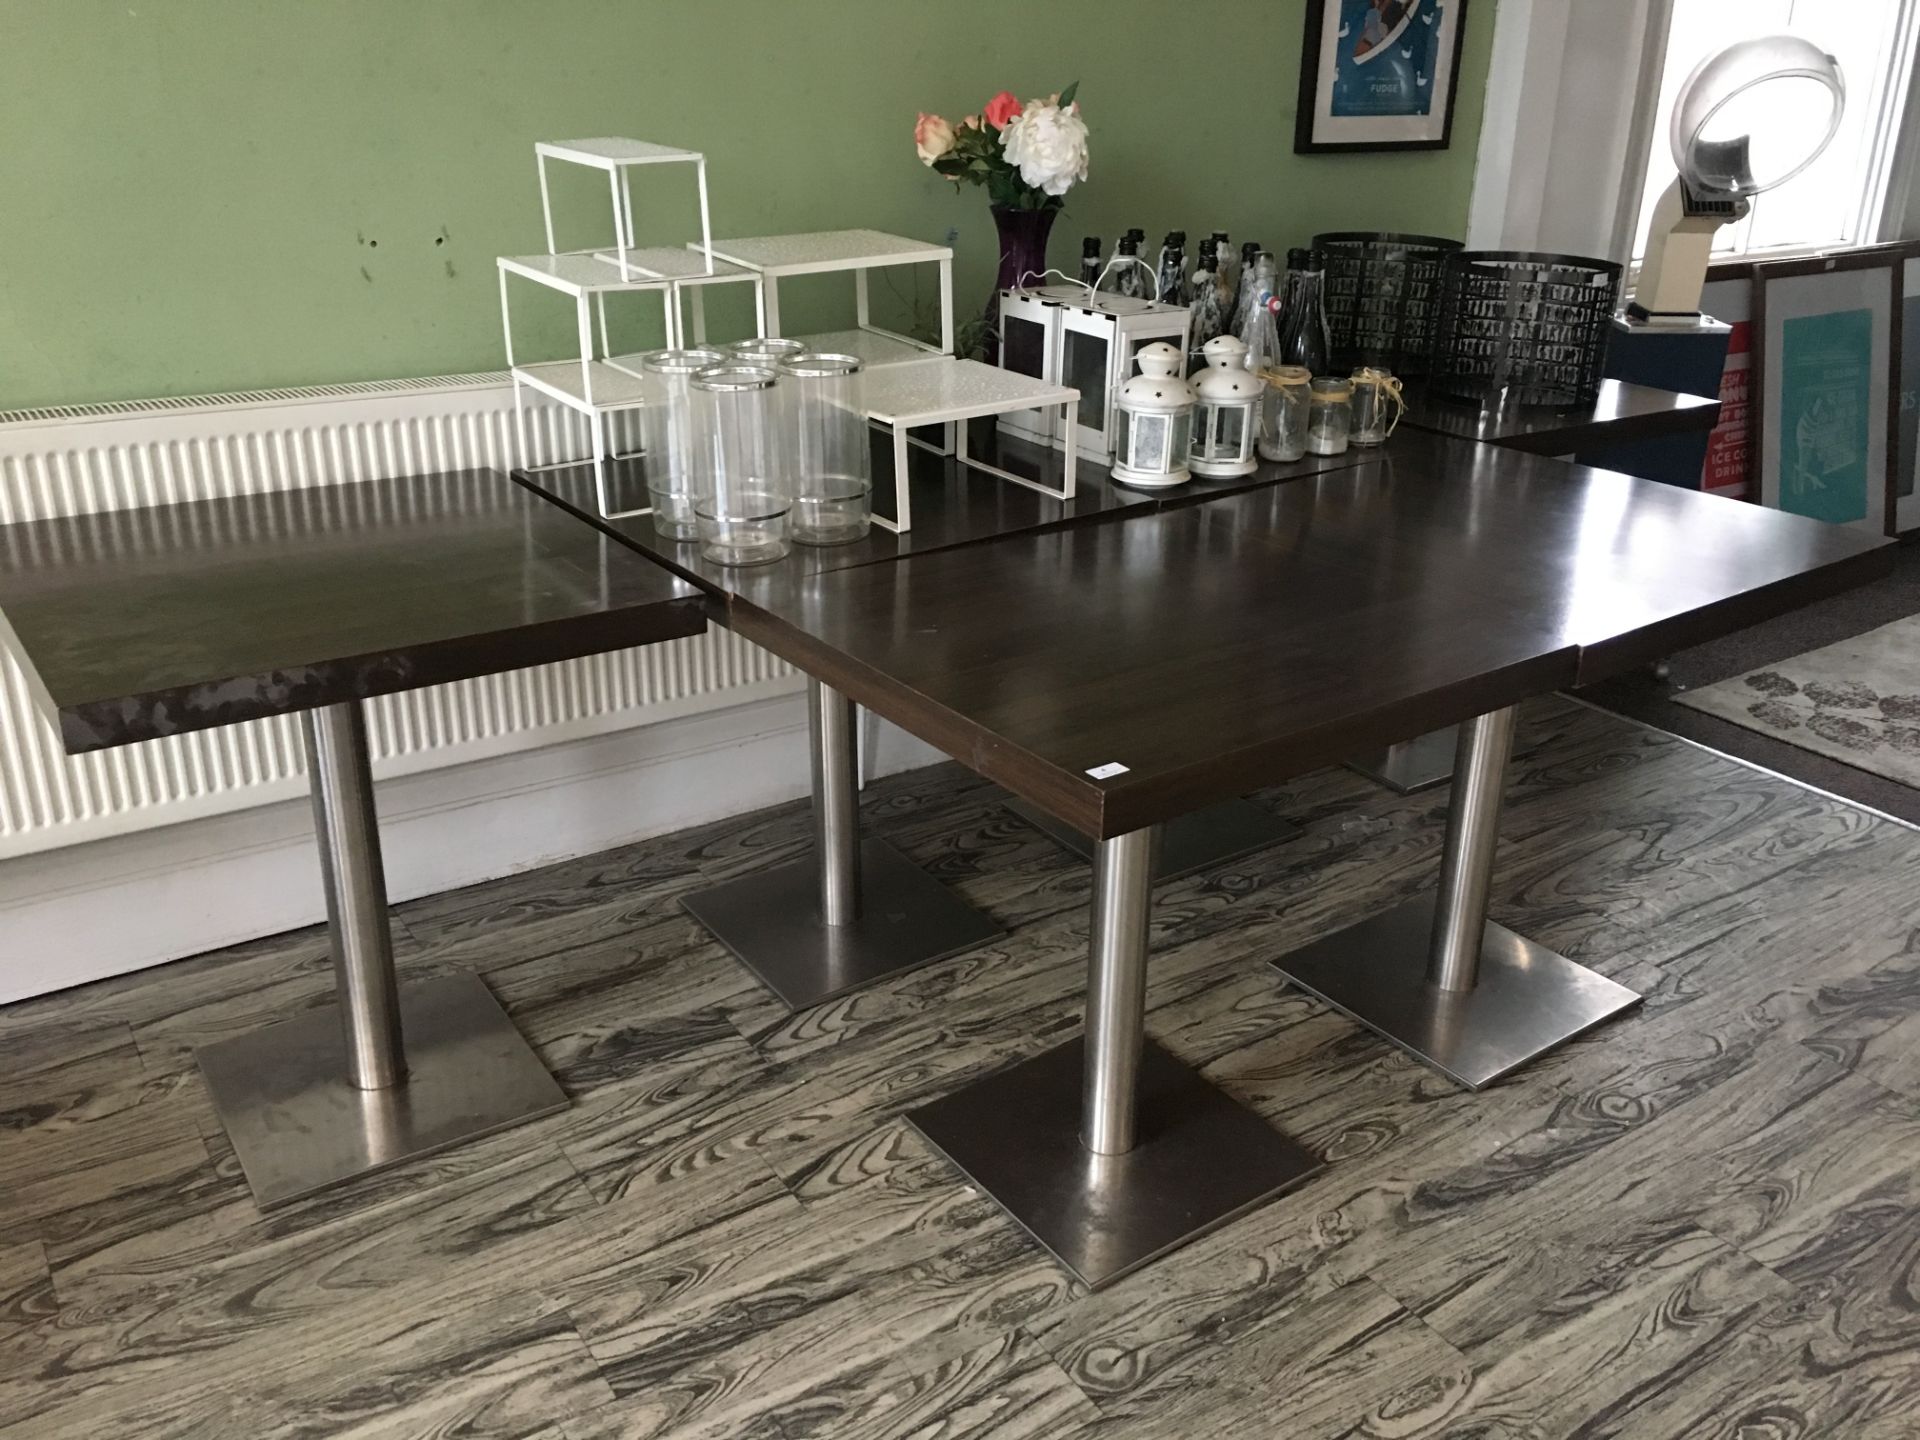 6 Tables with Dark Wood Finish tops and Stainless Steel Bases